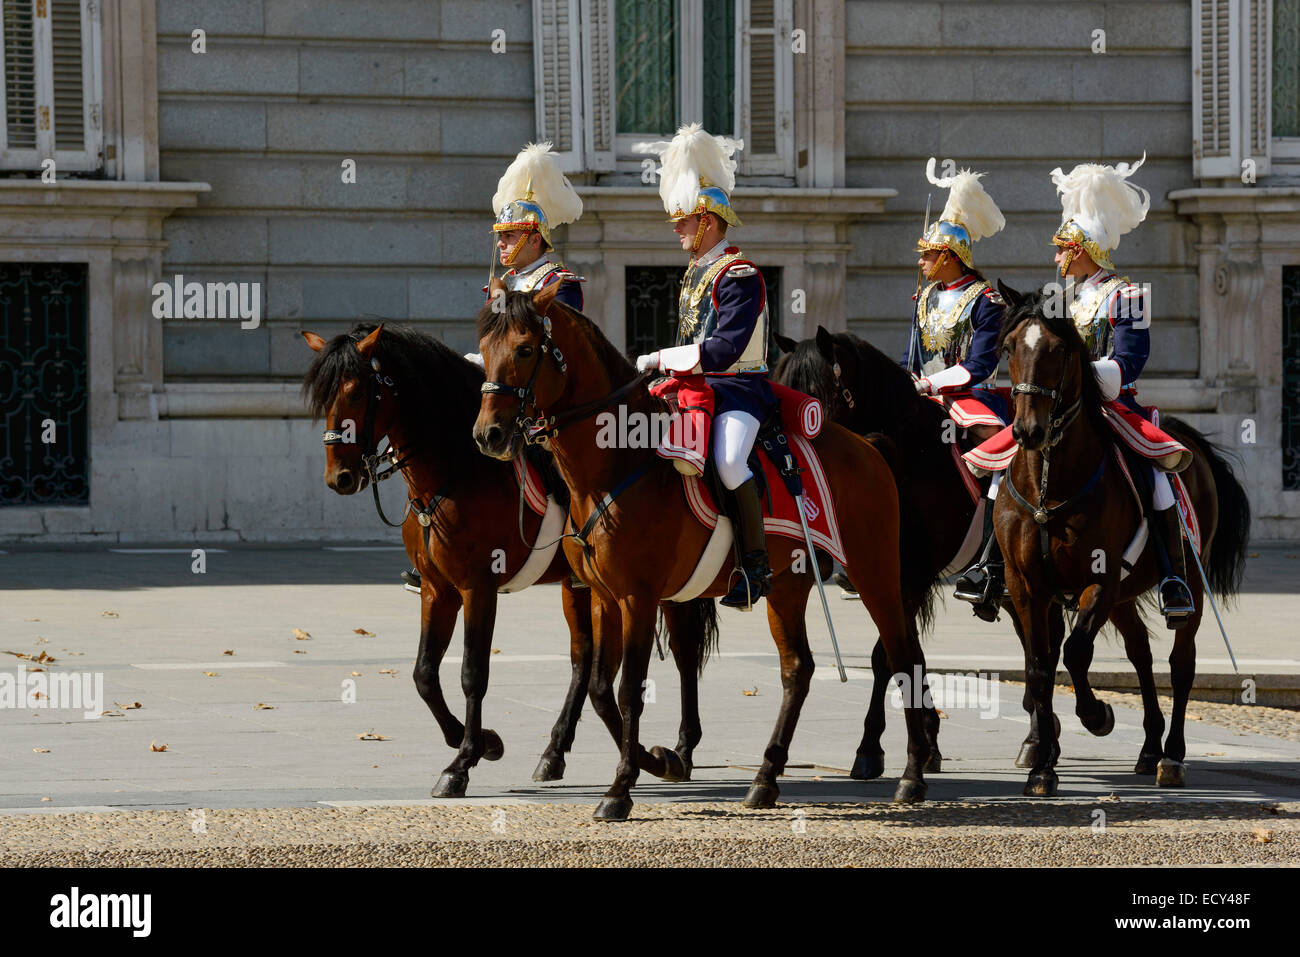 Royal Guards on horseback in front of the Royal Palace, Madrid, Spain Stock Photo